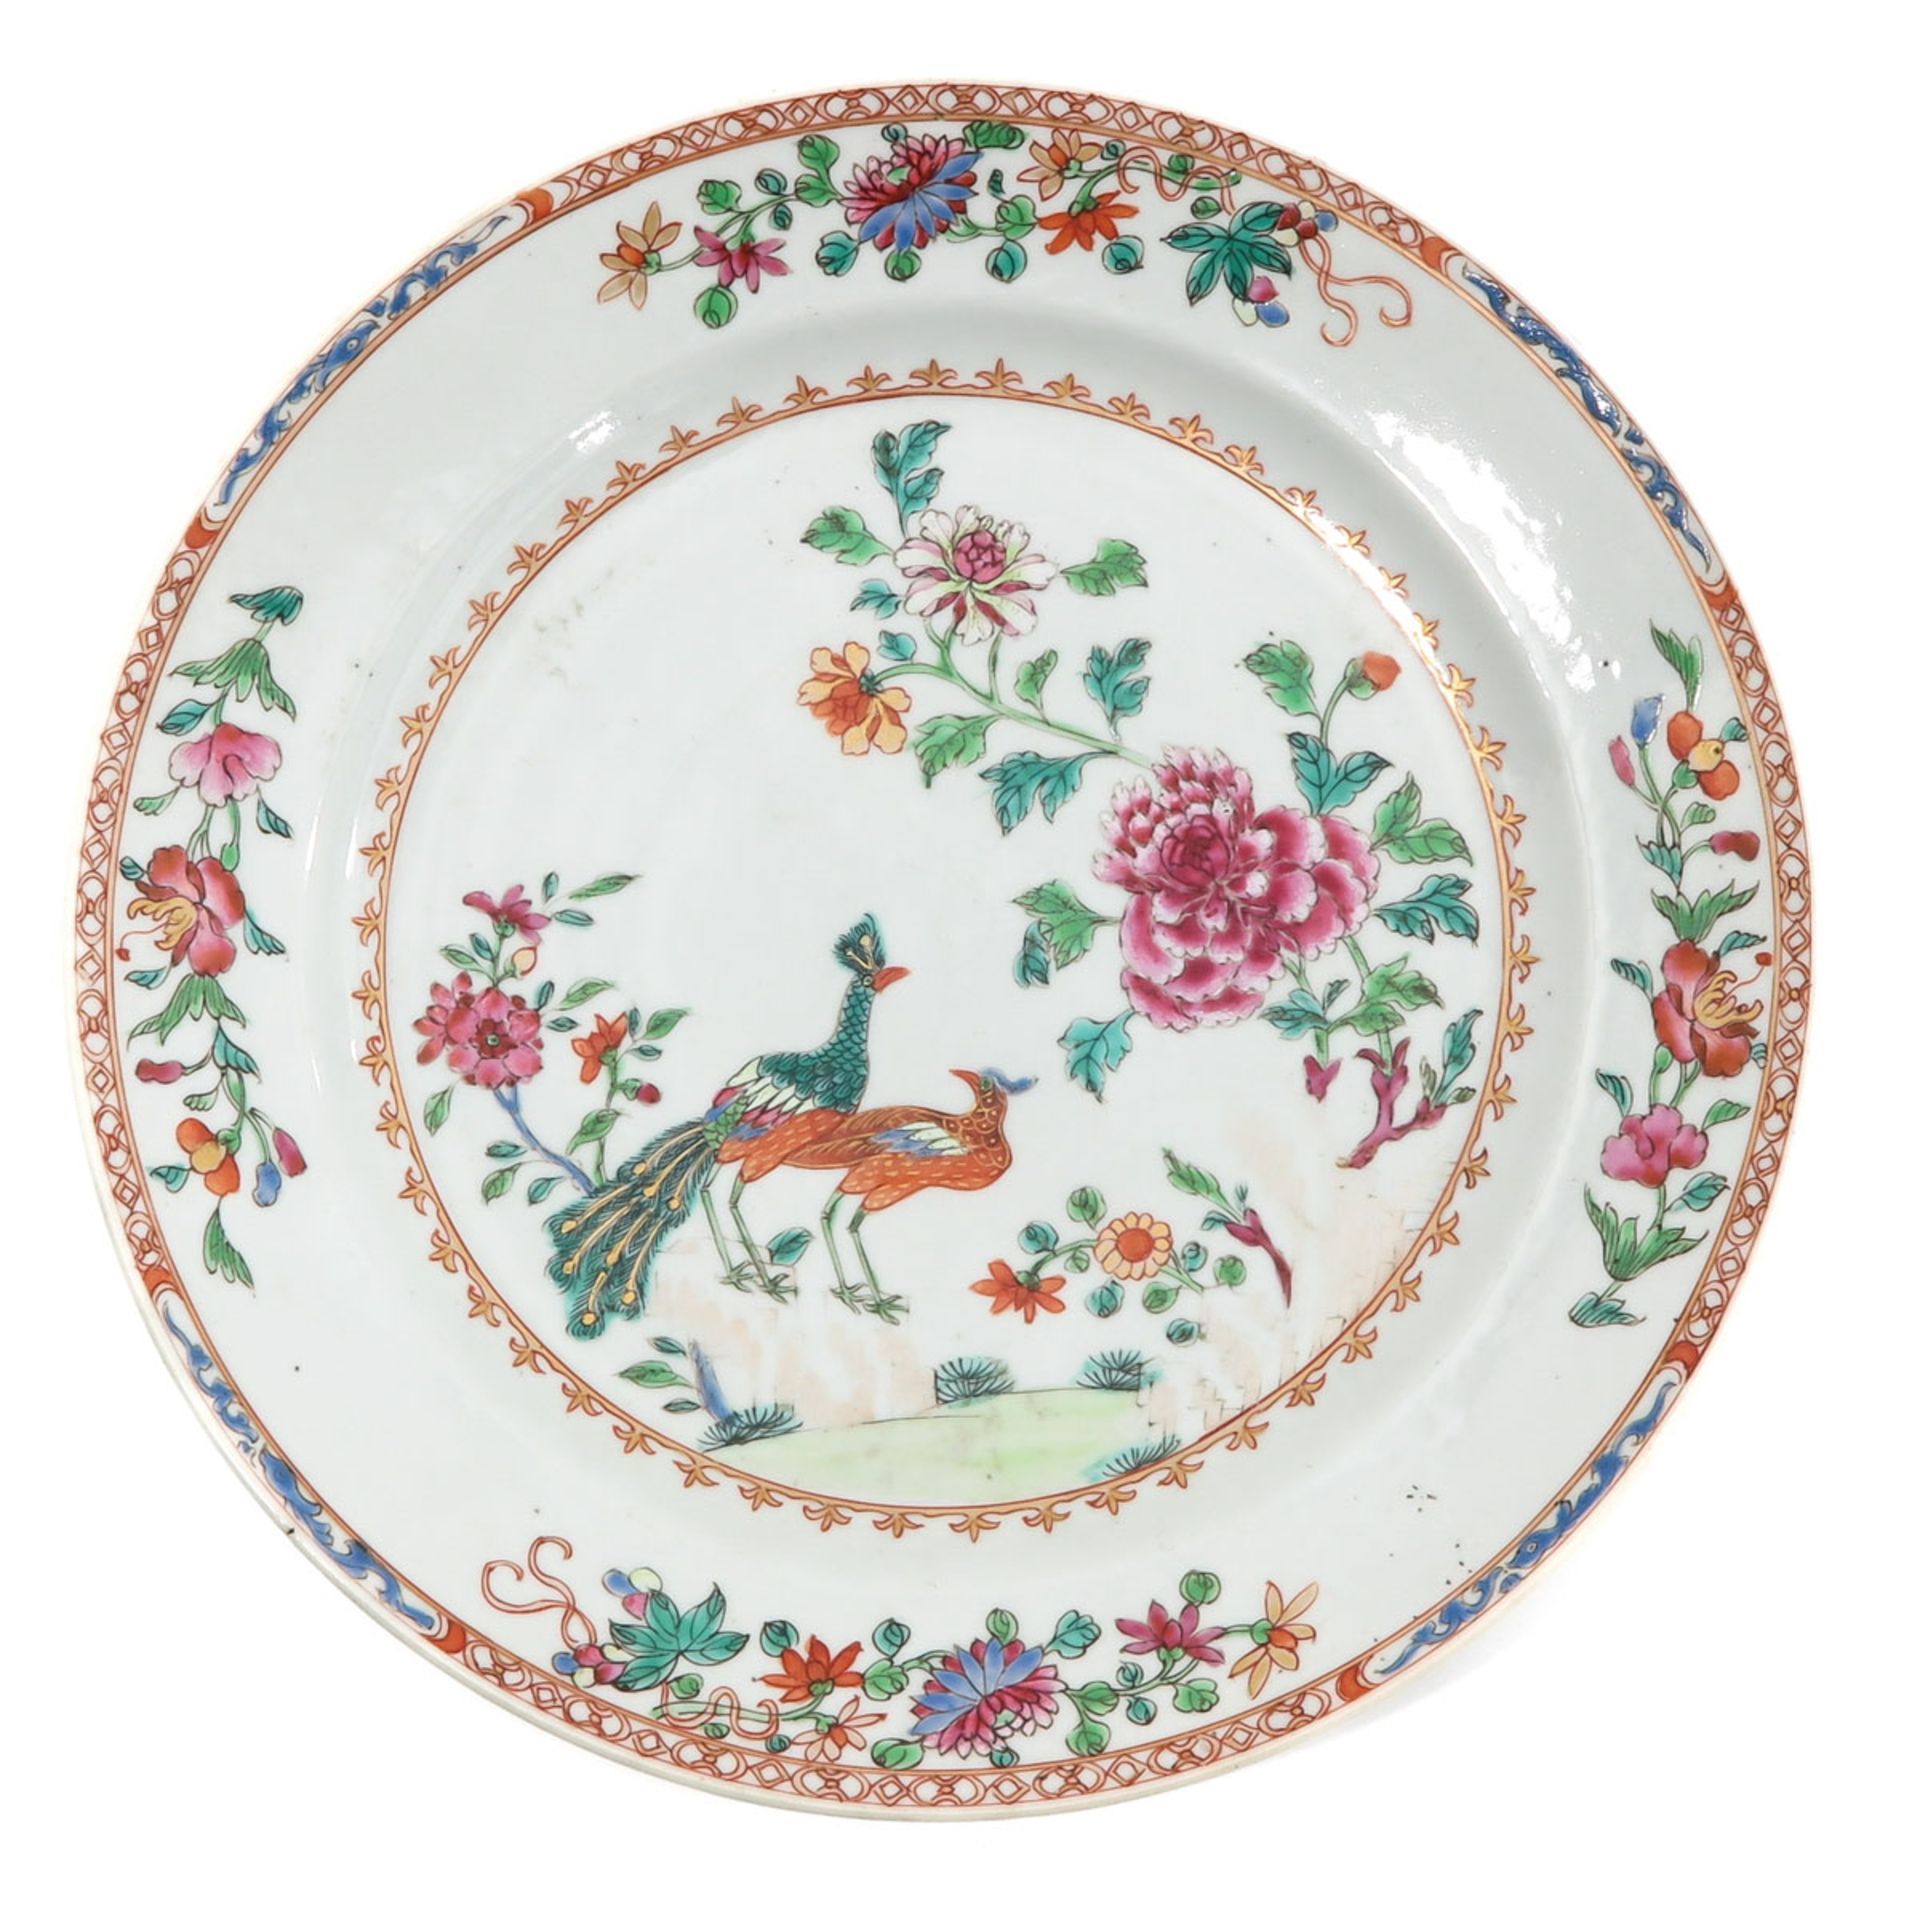 A Collection of 3 Famille Rose Plates - Image 3 of 10